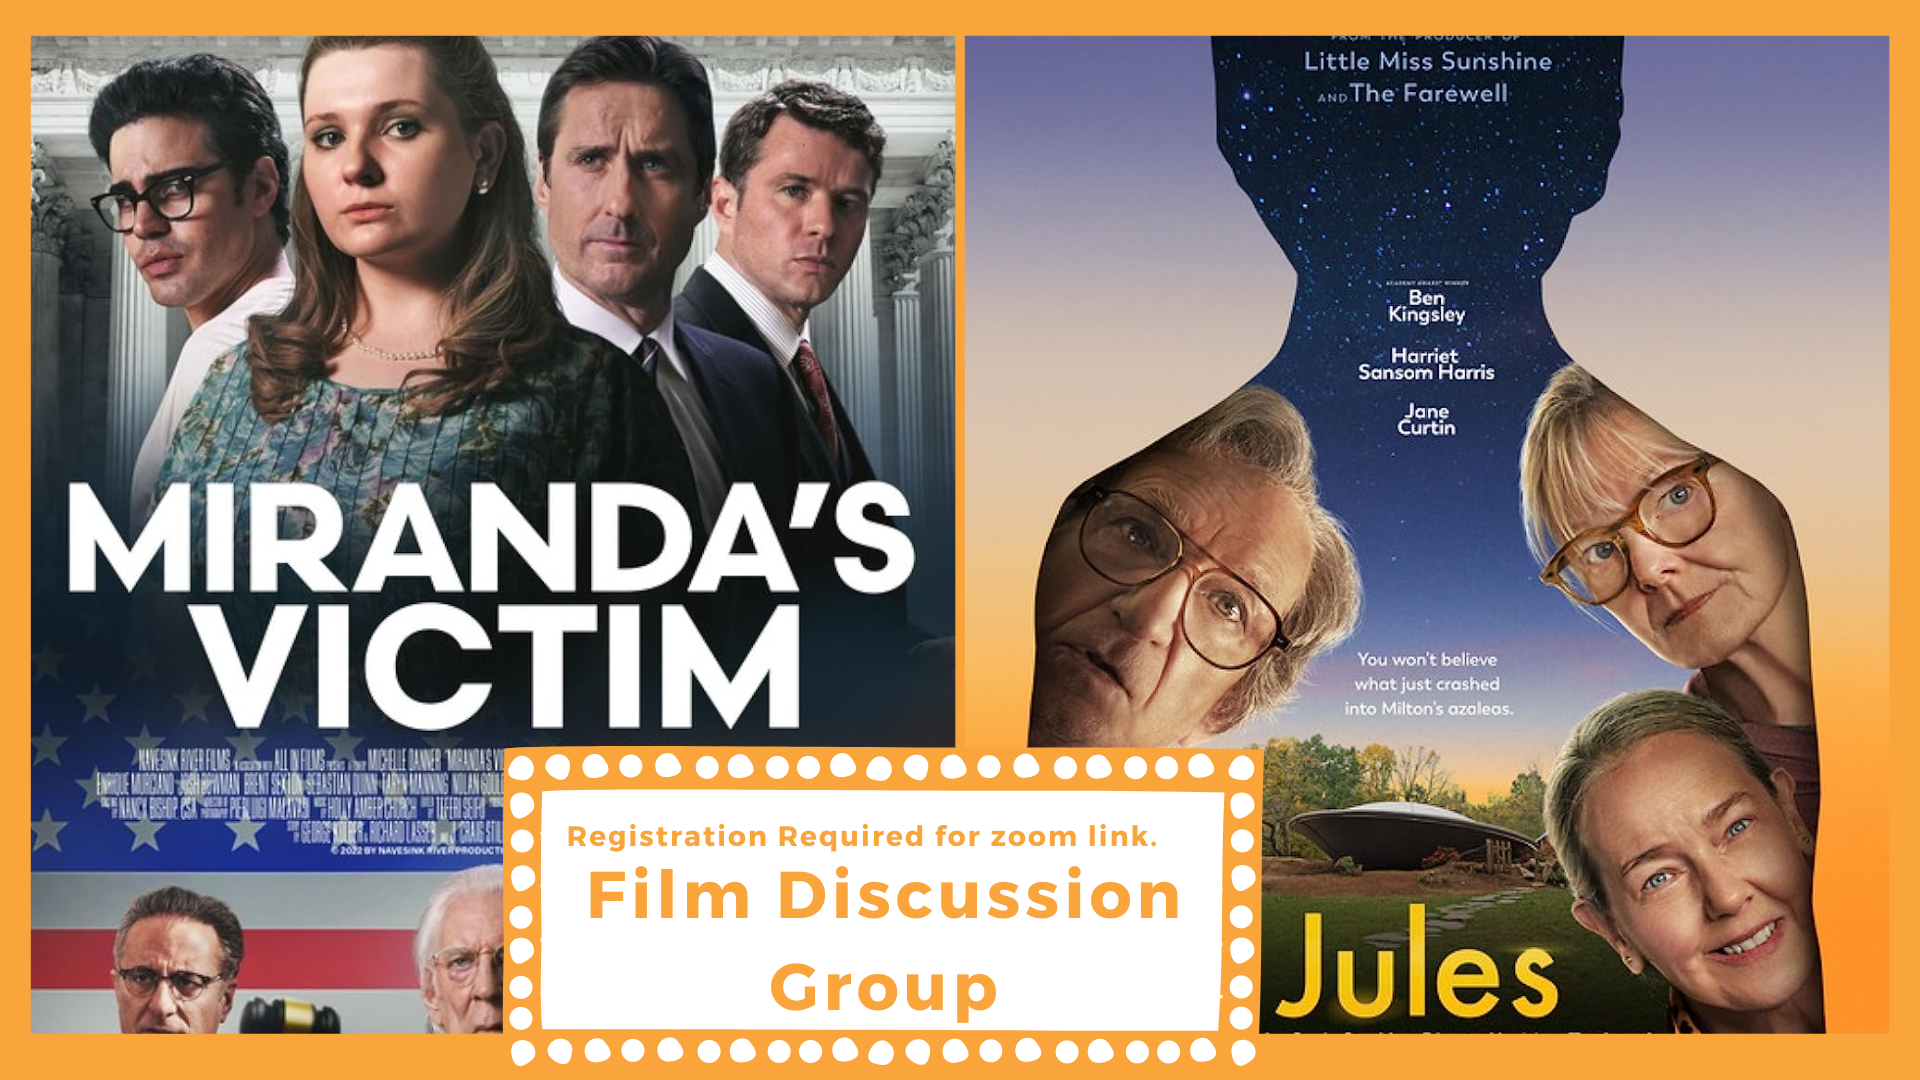 Film Discussion Group. Registration required for zoom link